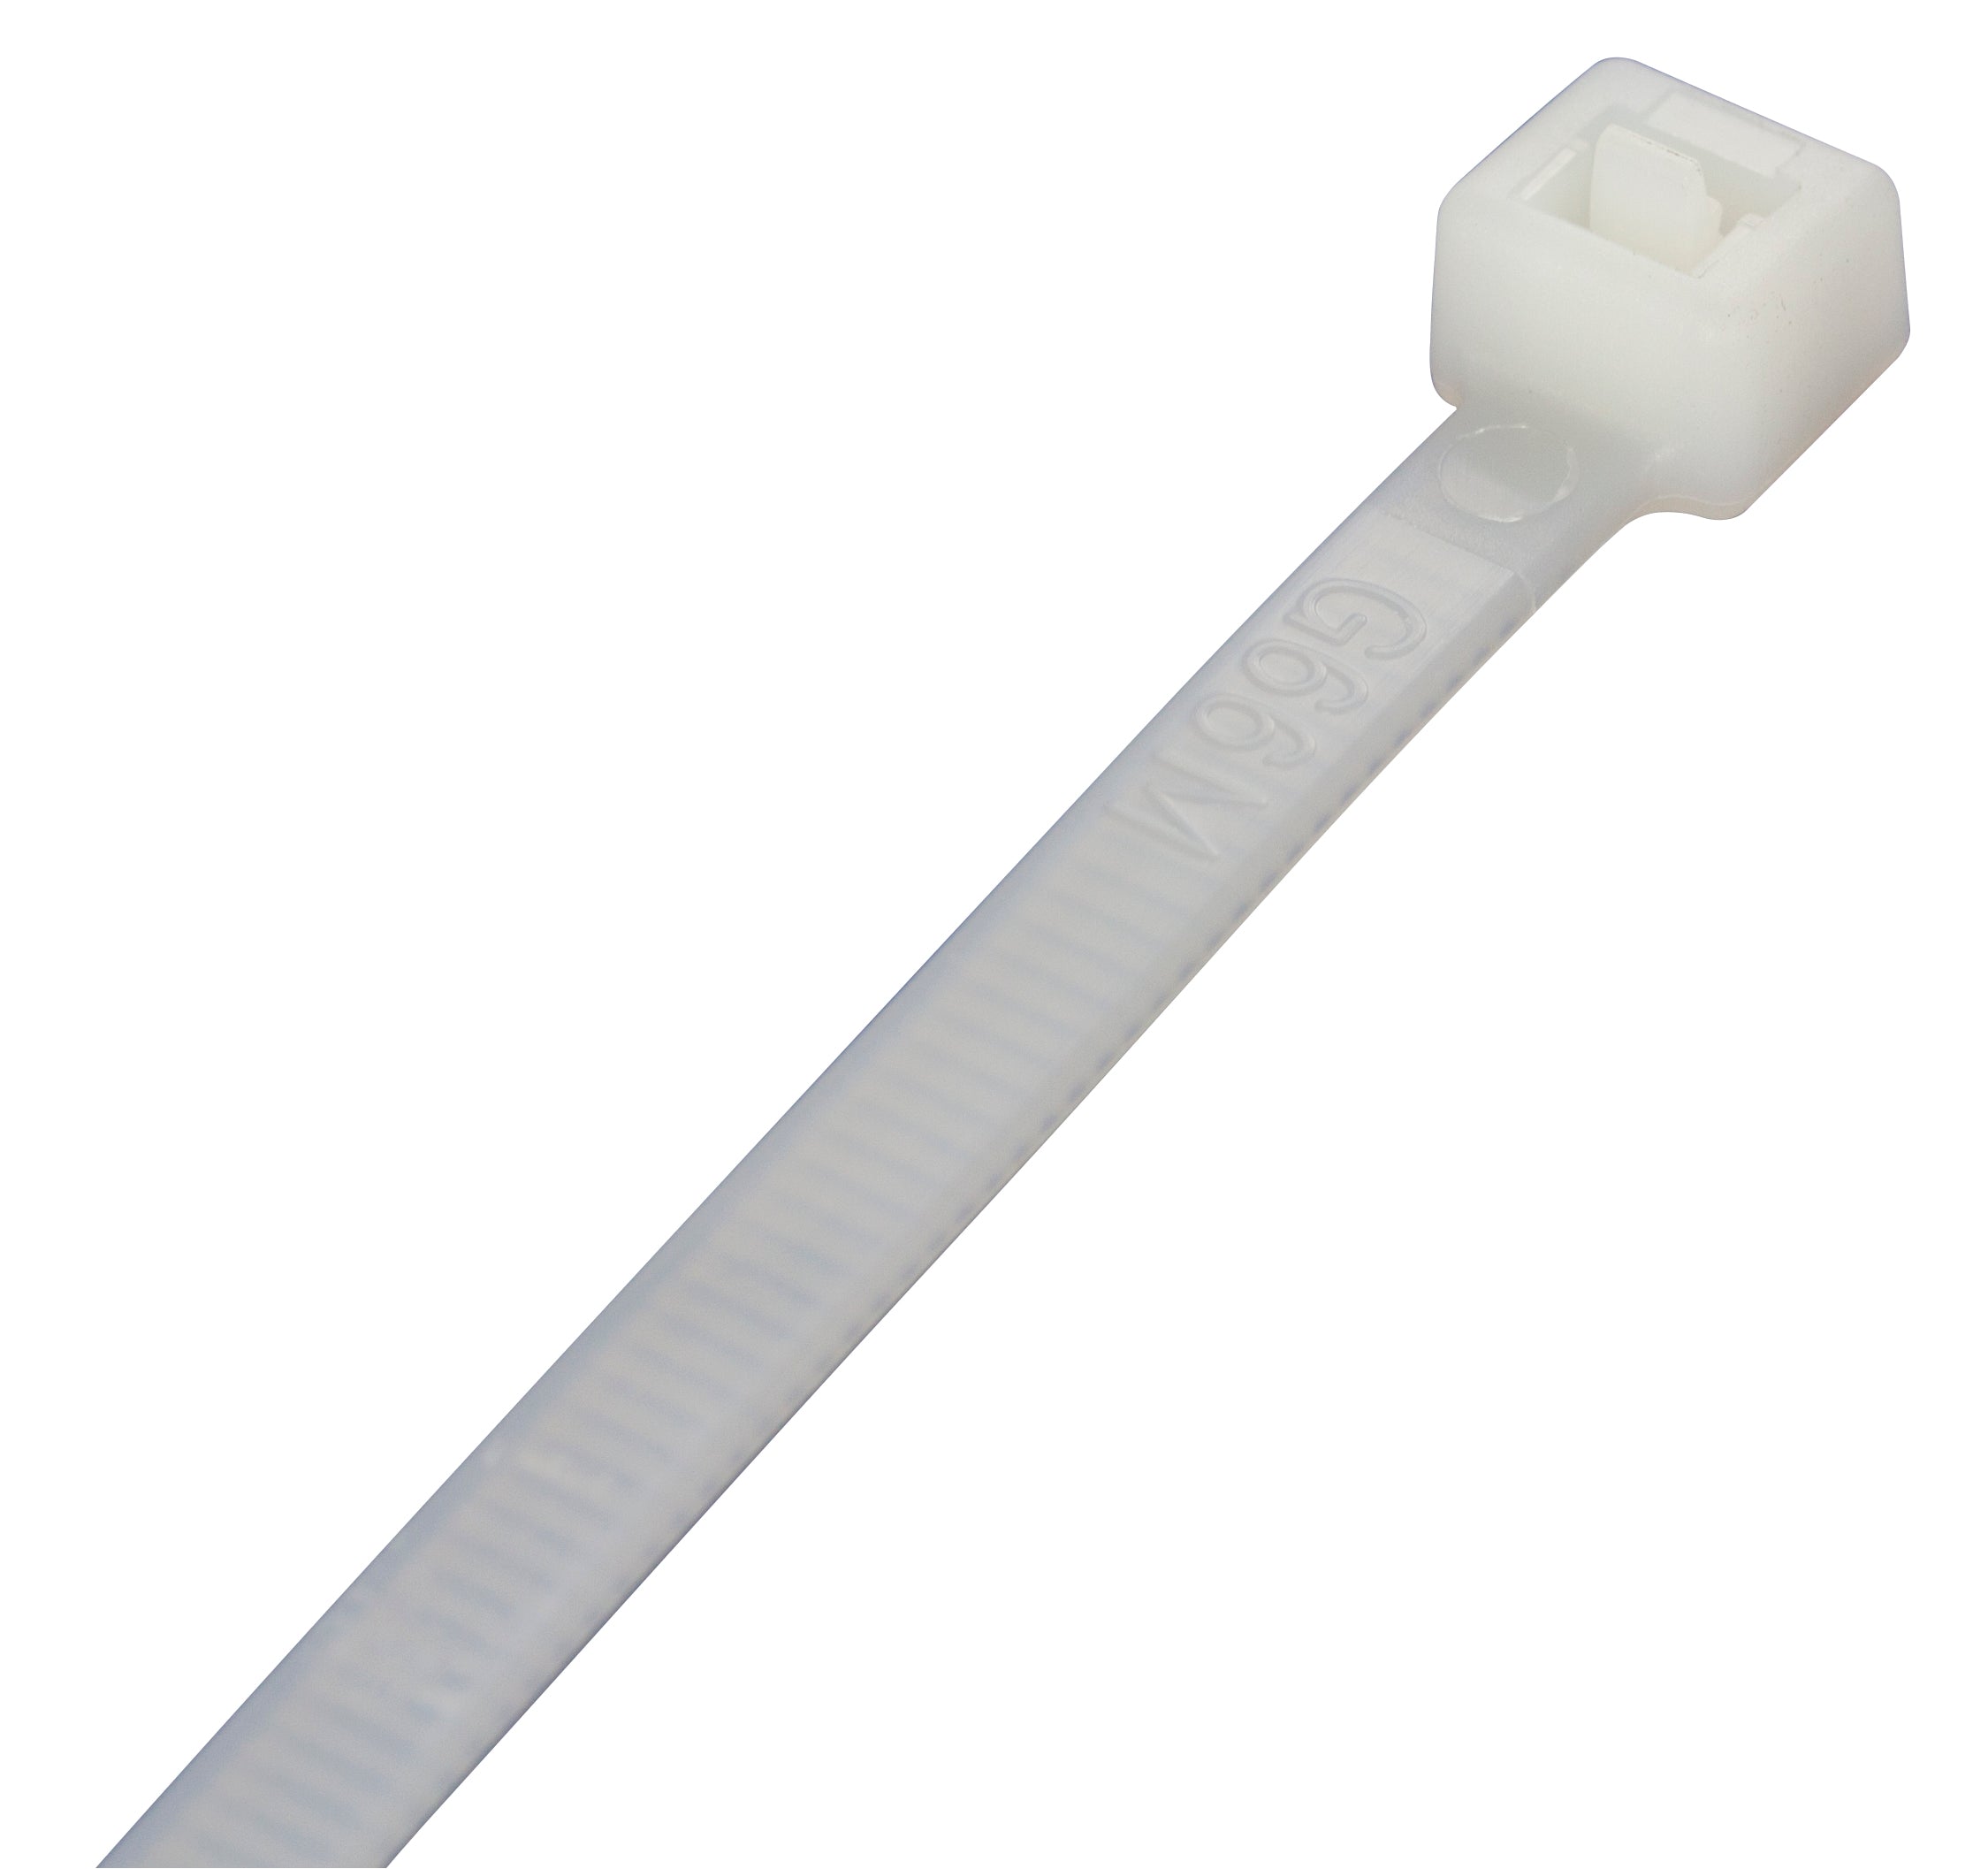 Premium Natural Cable Ties 80mm x 2.5mm - Pack of 100